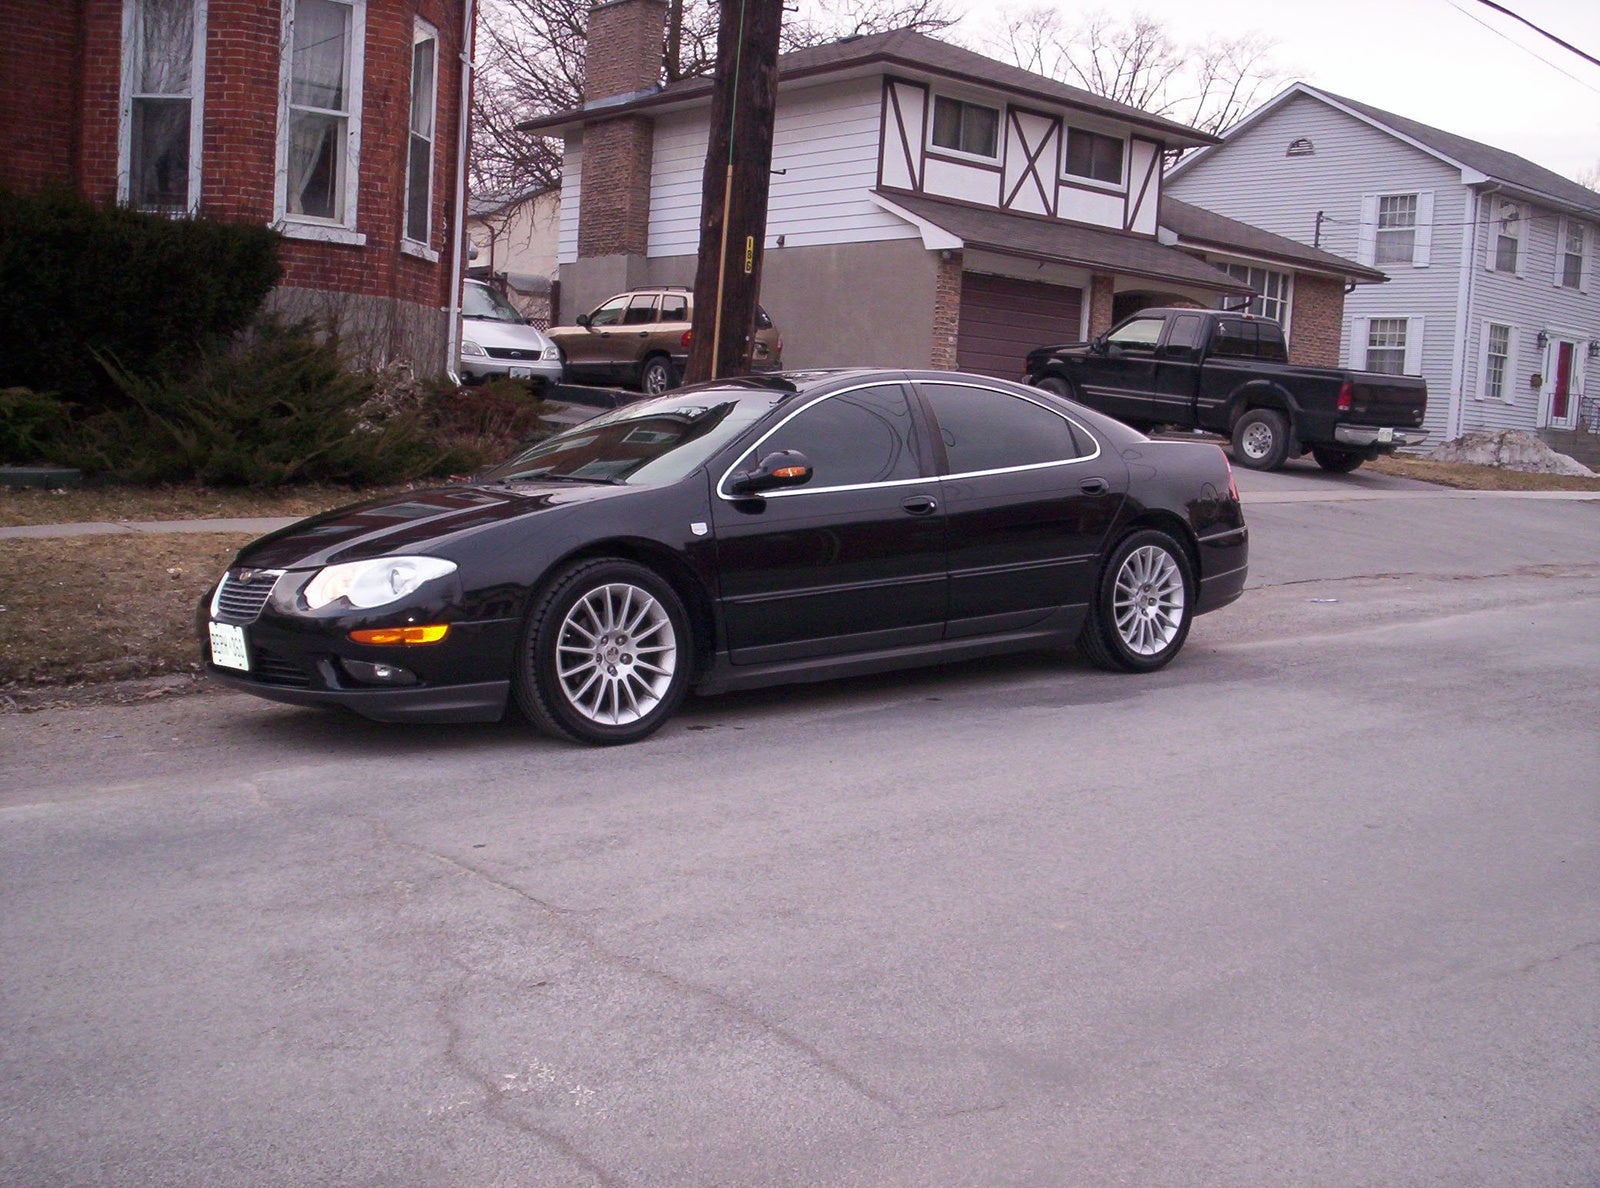 2003_chrysler_300m_special-pic-36490.jpe